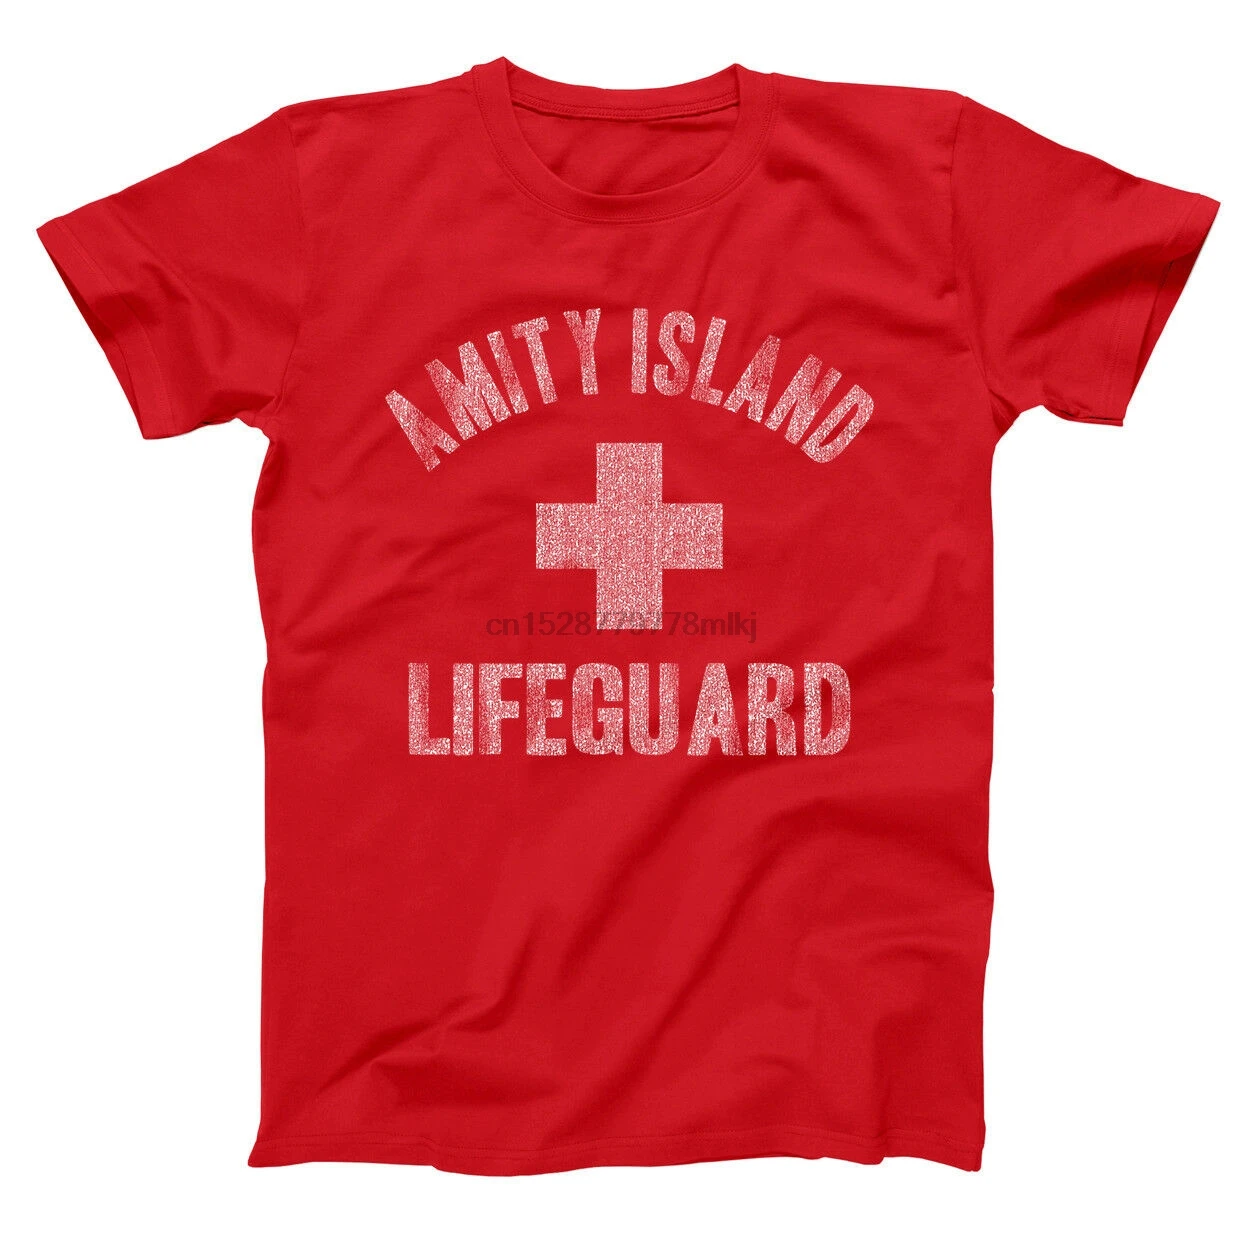 NW MEN'S PRINTED "LIFEGUARD" POOL BEACH SAFETY STAFF COTTON RED T-SHIRT ALL SIZE